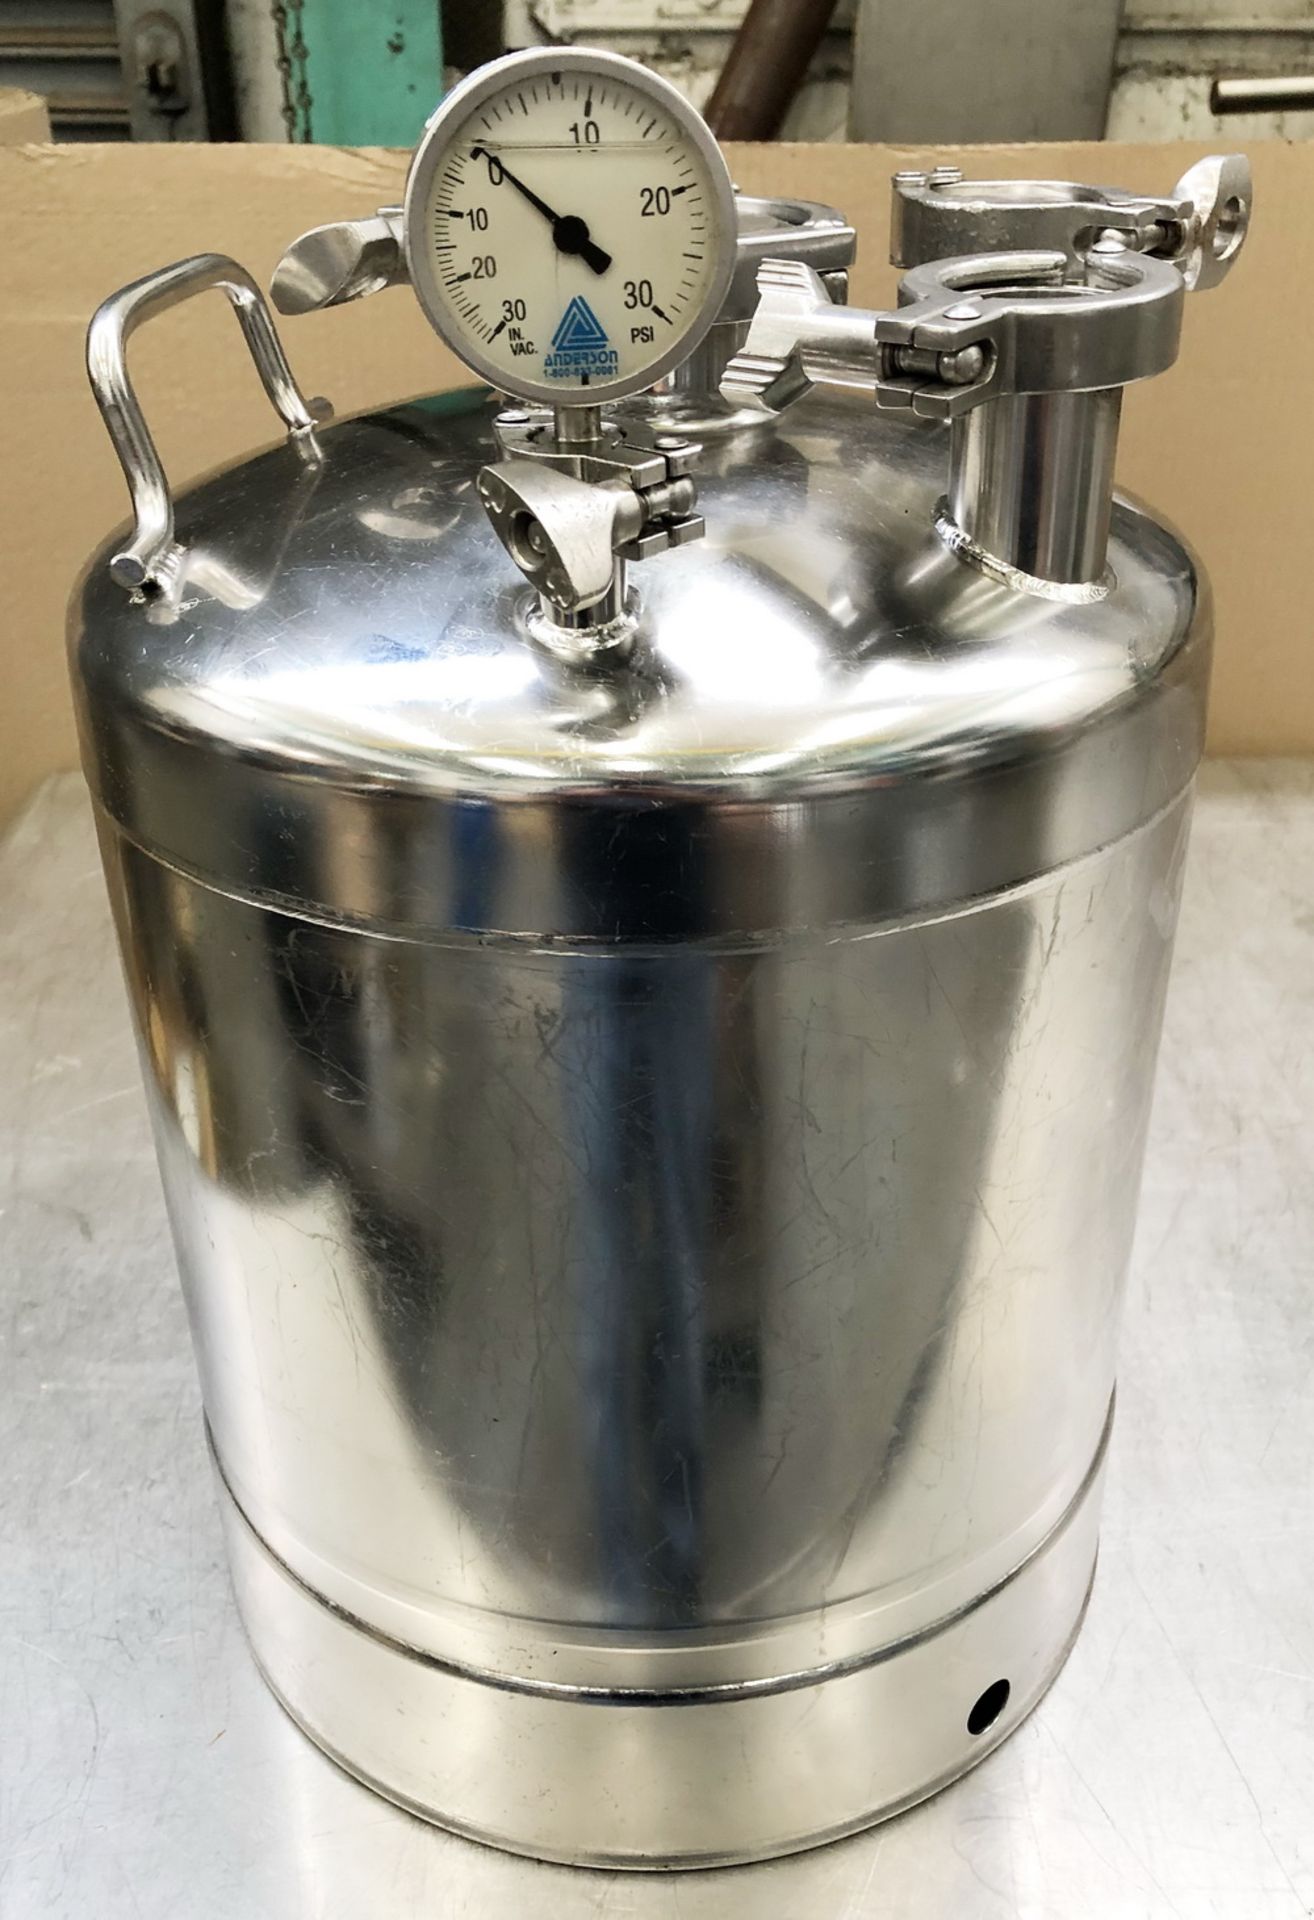 Alloy Products 316SS Pressure Container, approximately 5 gallon, 128 psi mwp